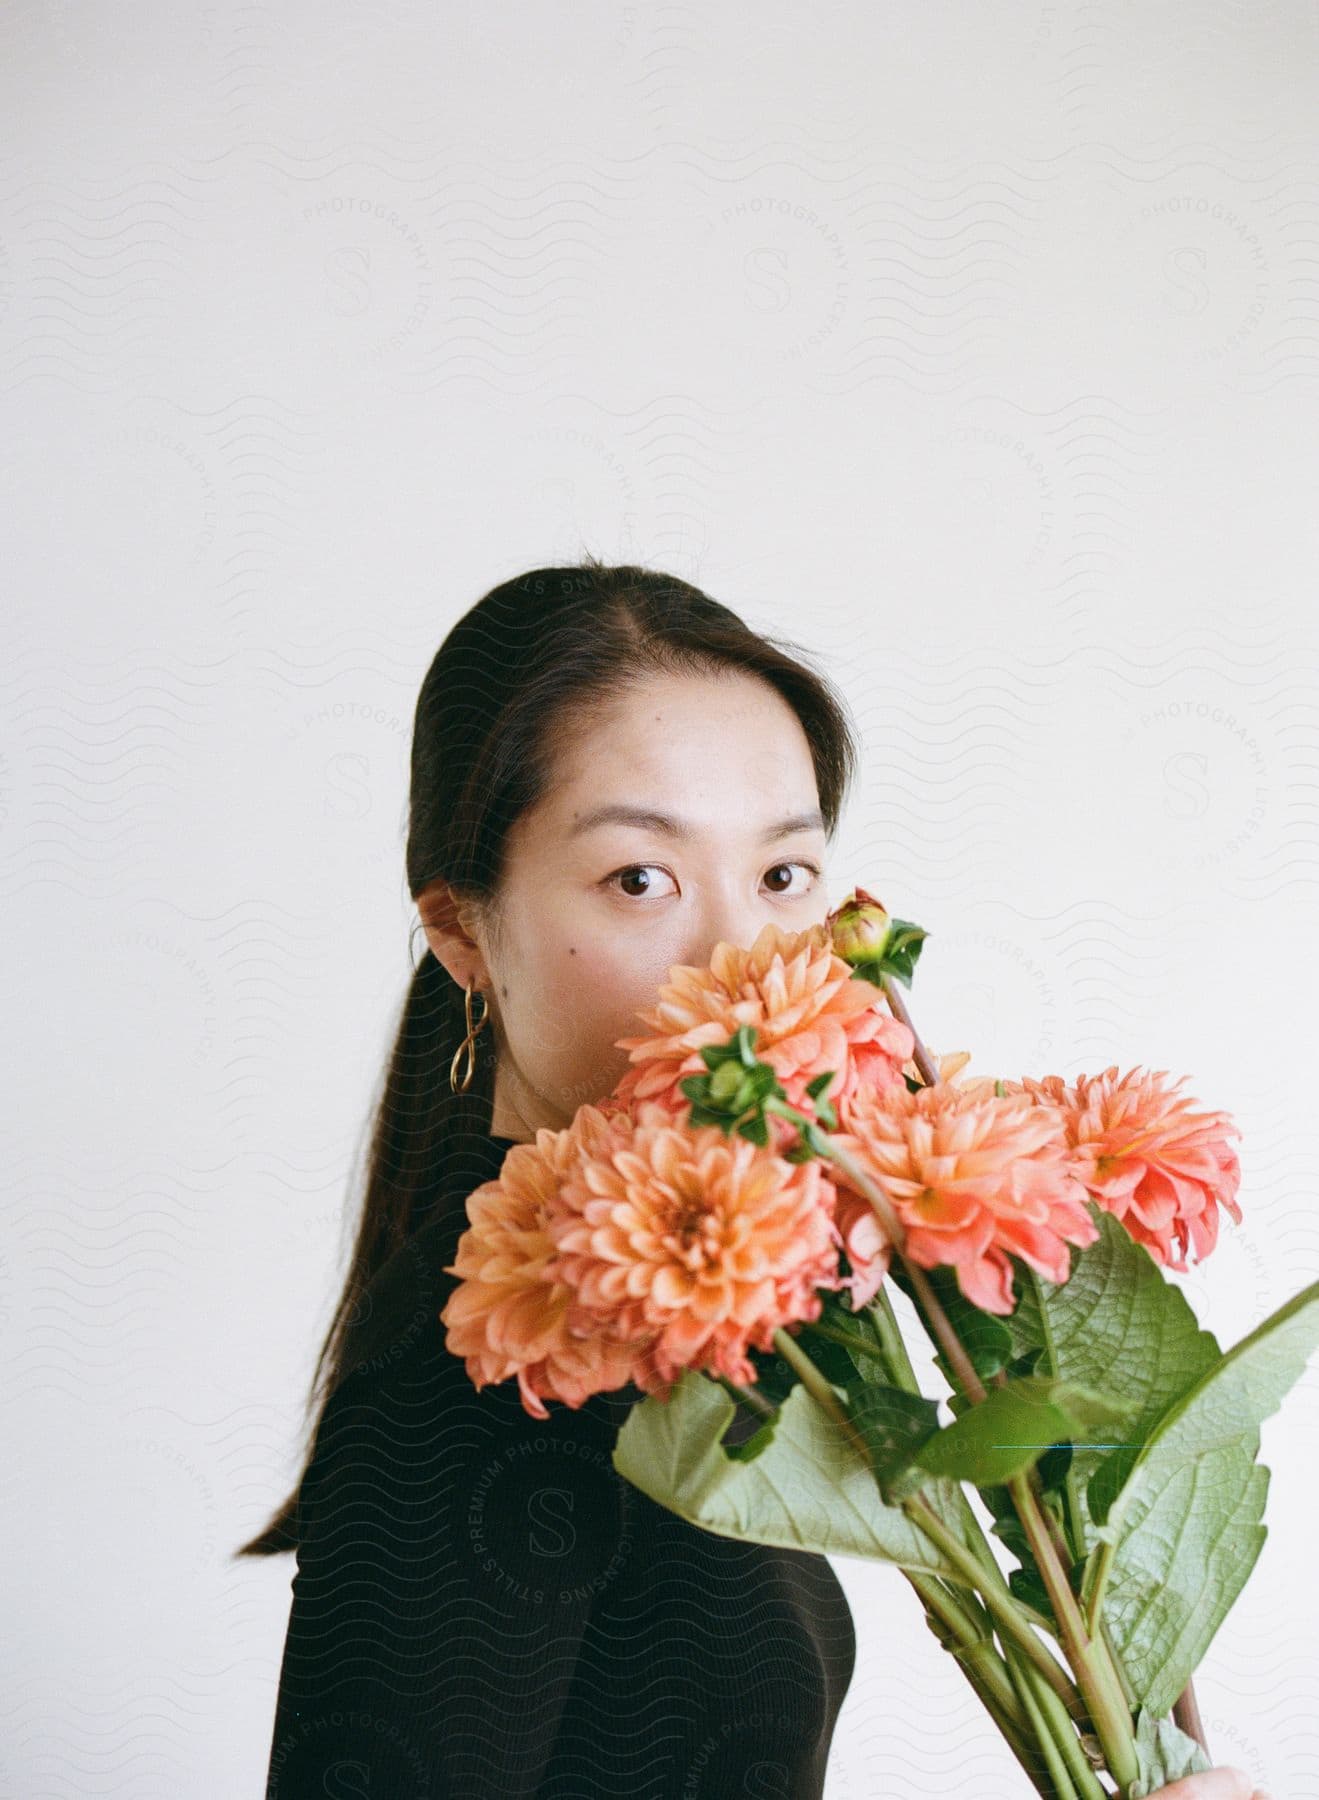 A woman is looking forward while smelling a bouquet of orange-colored flowers on a white background